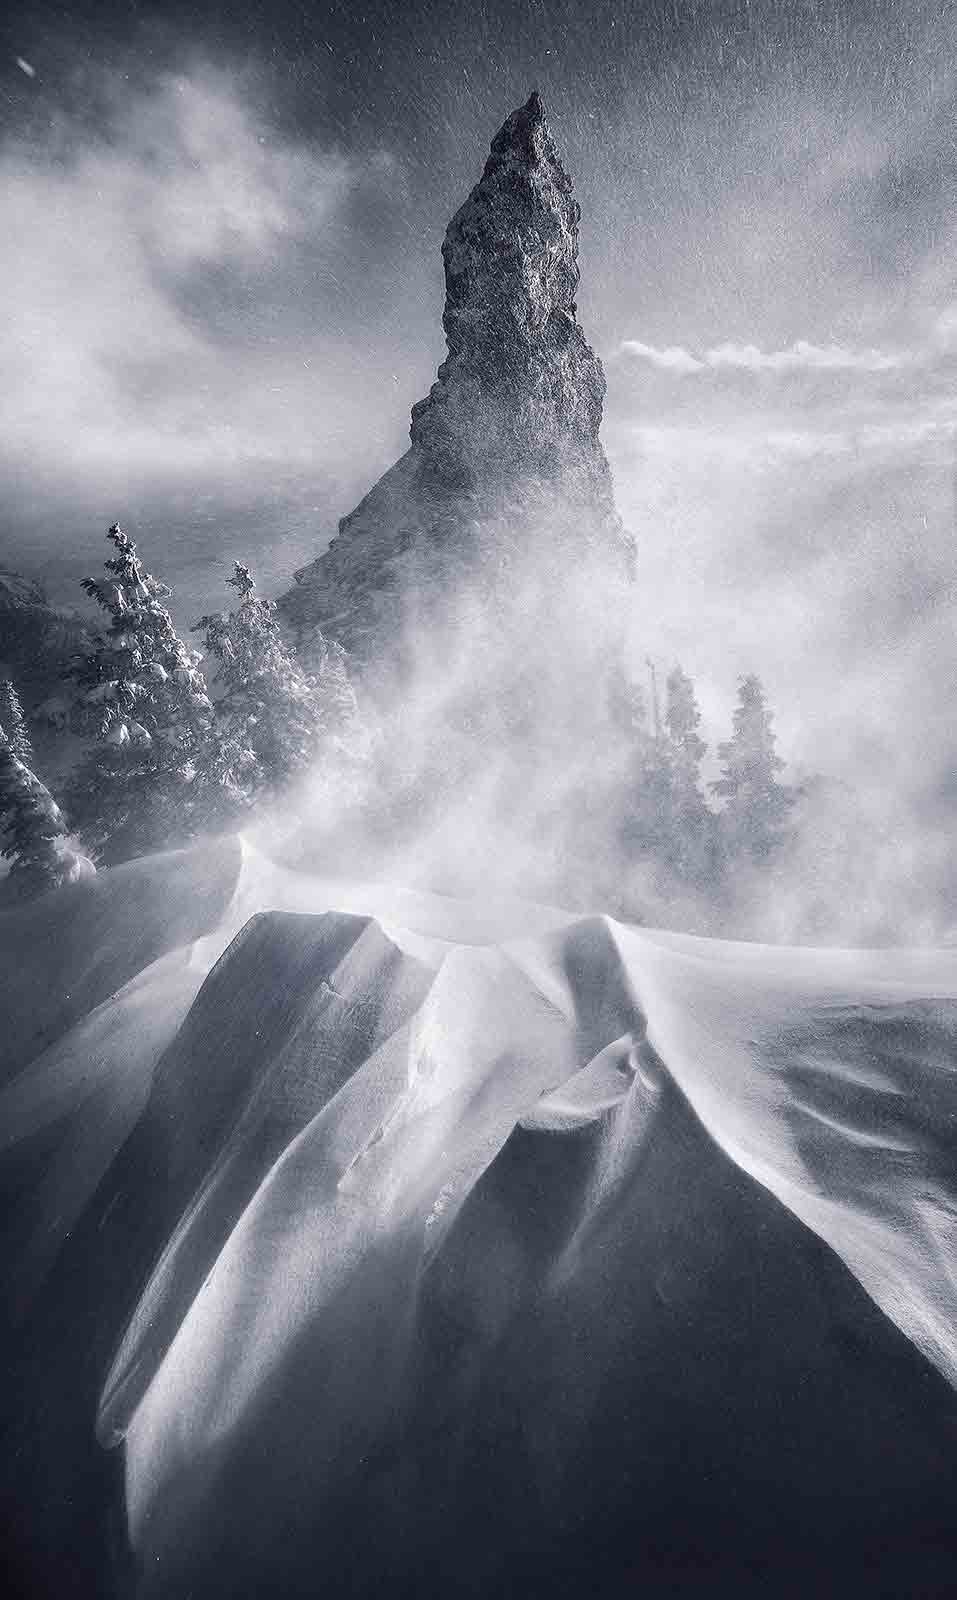 Blizzard conditions surrounding this giant rock spire high on Oregon's Iron Mountain in mid-Winter.